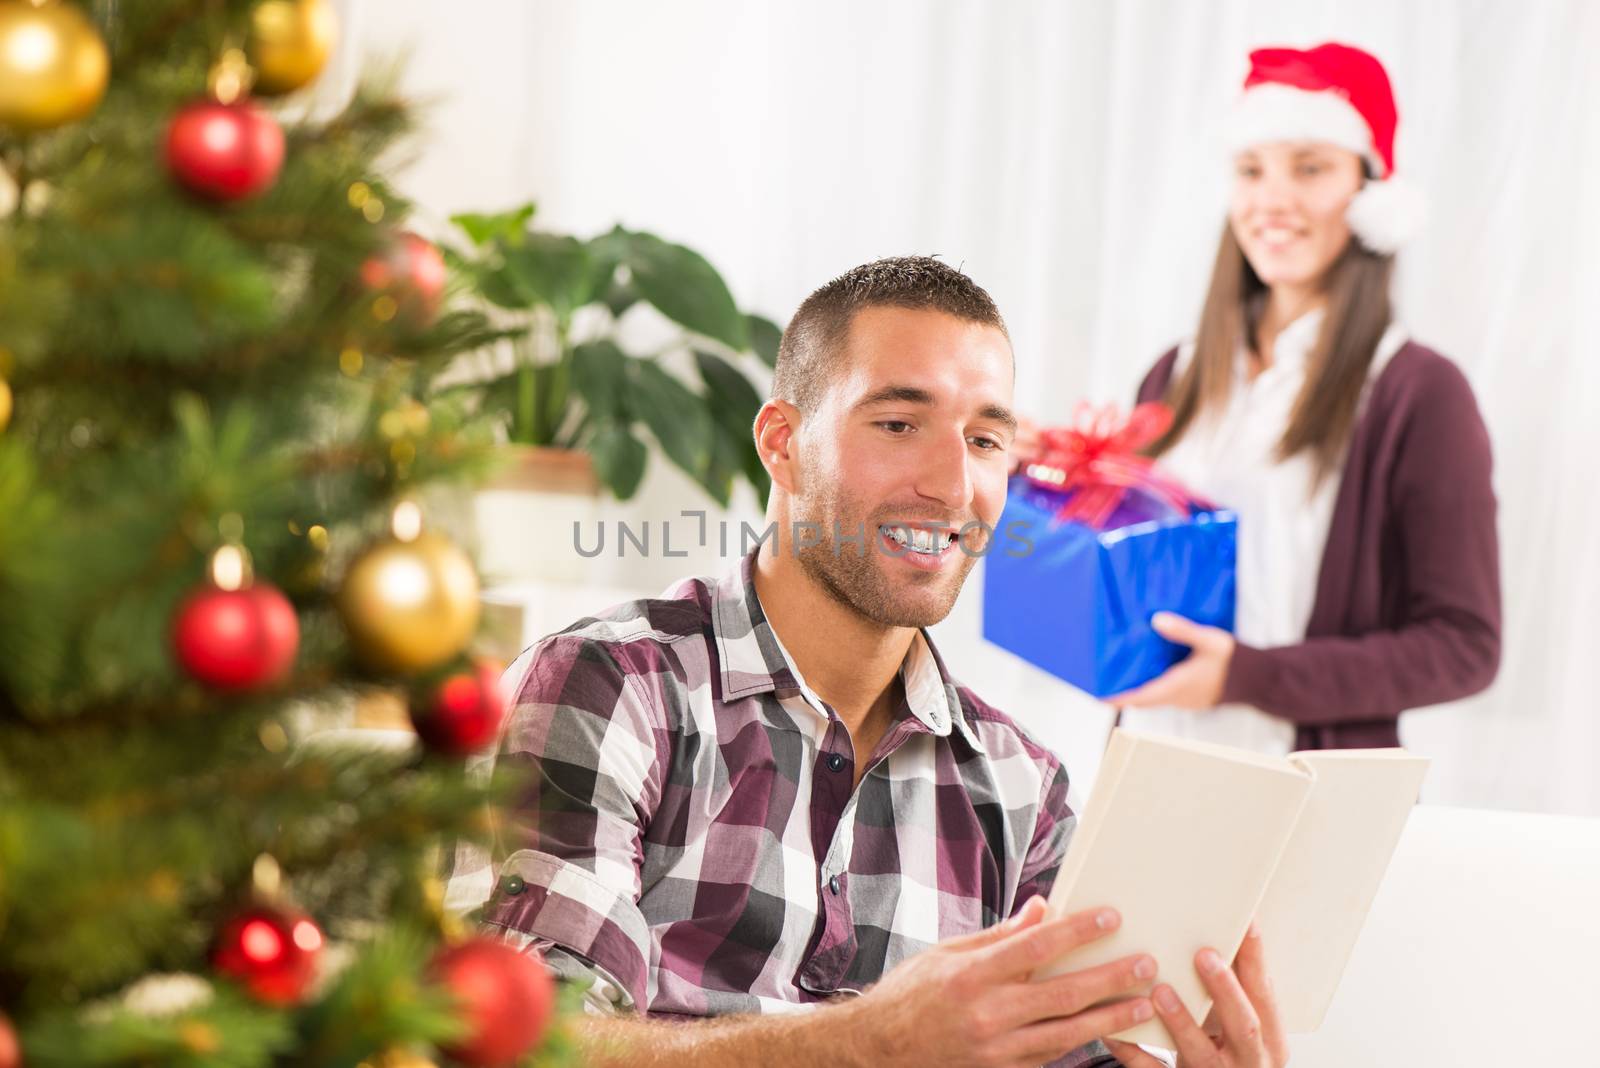 Young beautiful man reading book while his girlfriend holds a Christmas gift and she wants to surprise him.